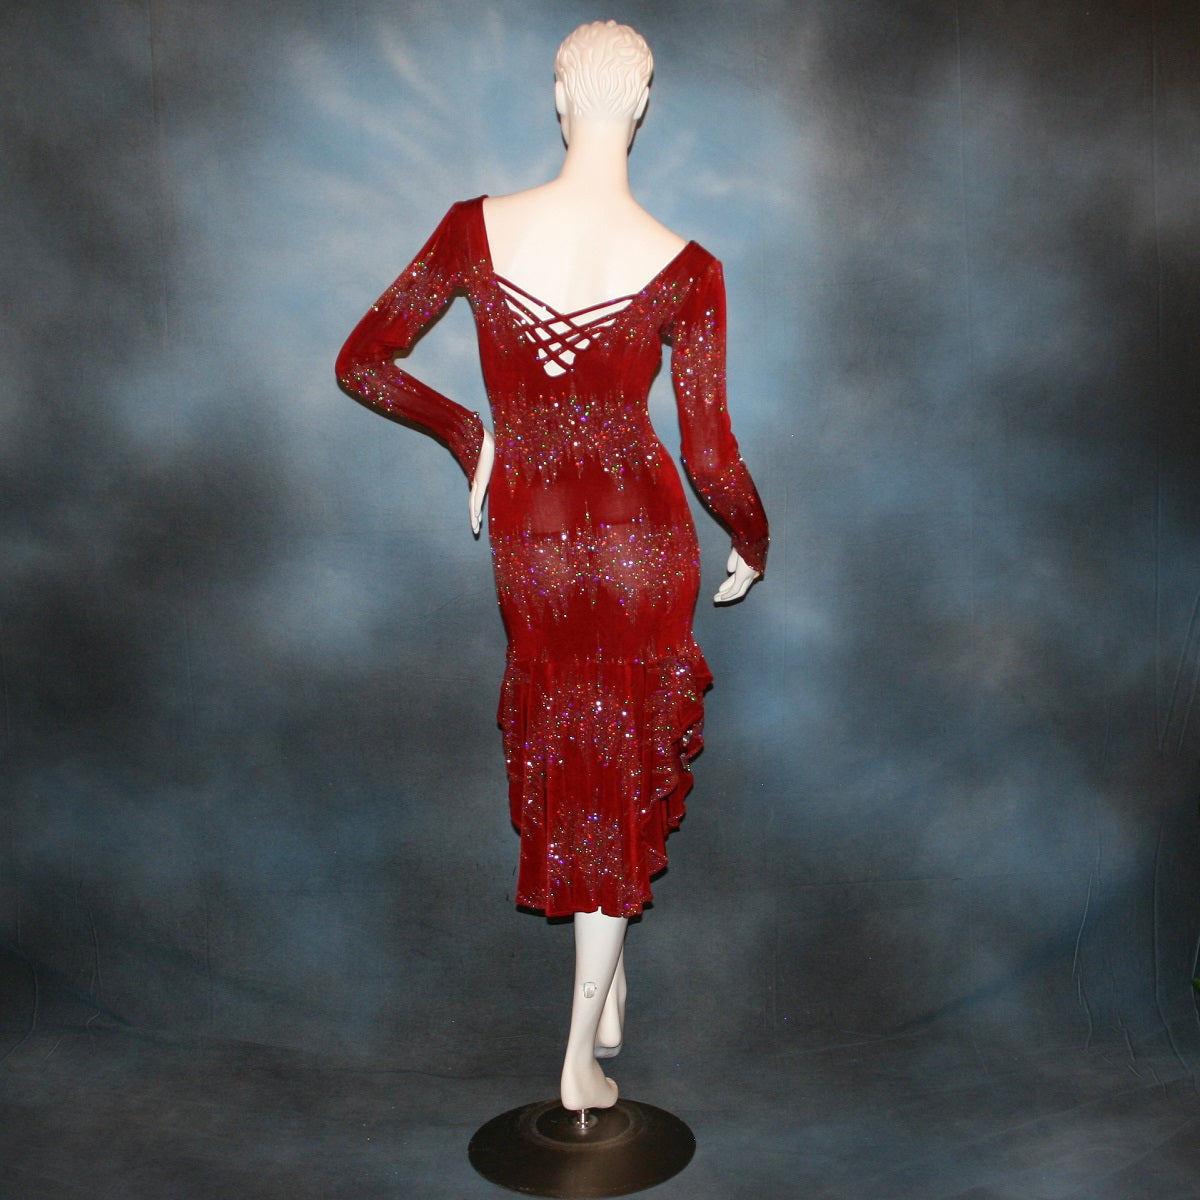 backview of Deep scarlette red Latin/rhythm/tango dress created in glitter slinky with an awesome electrifying glitter pattern features lattice detailing in the back, long sleeves with Swarovski hand beading in the skirt sides.